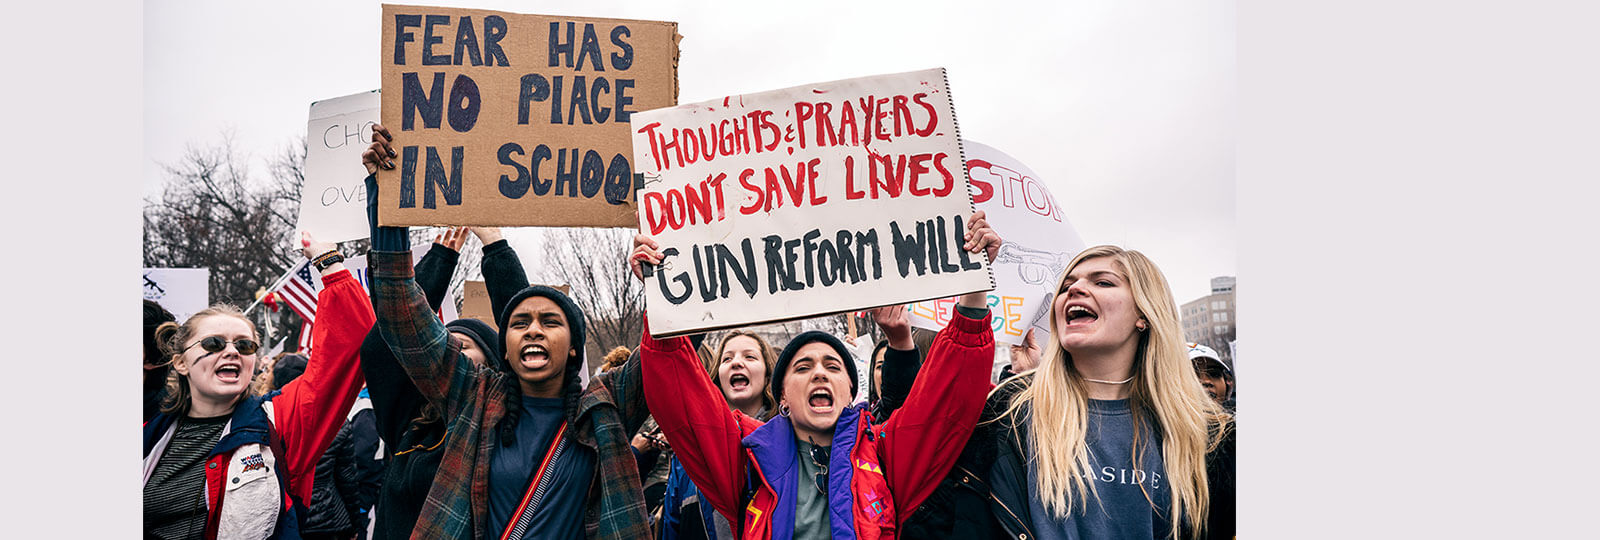 A photo from a protest of teens fighting for gun control. Two visible signs say "Fear has no place in school" and "Thoughts and prayers don't save lives. Gun reform will."